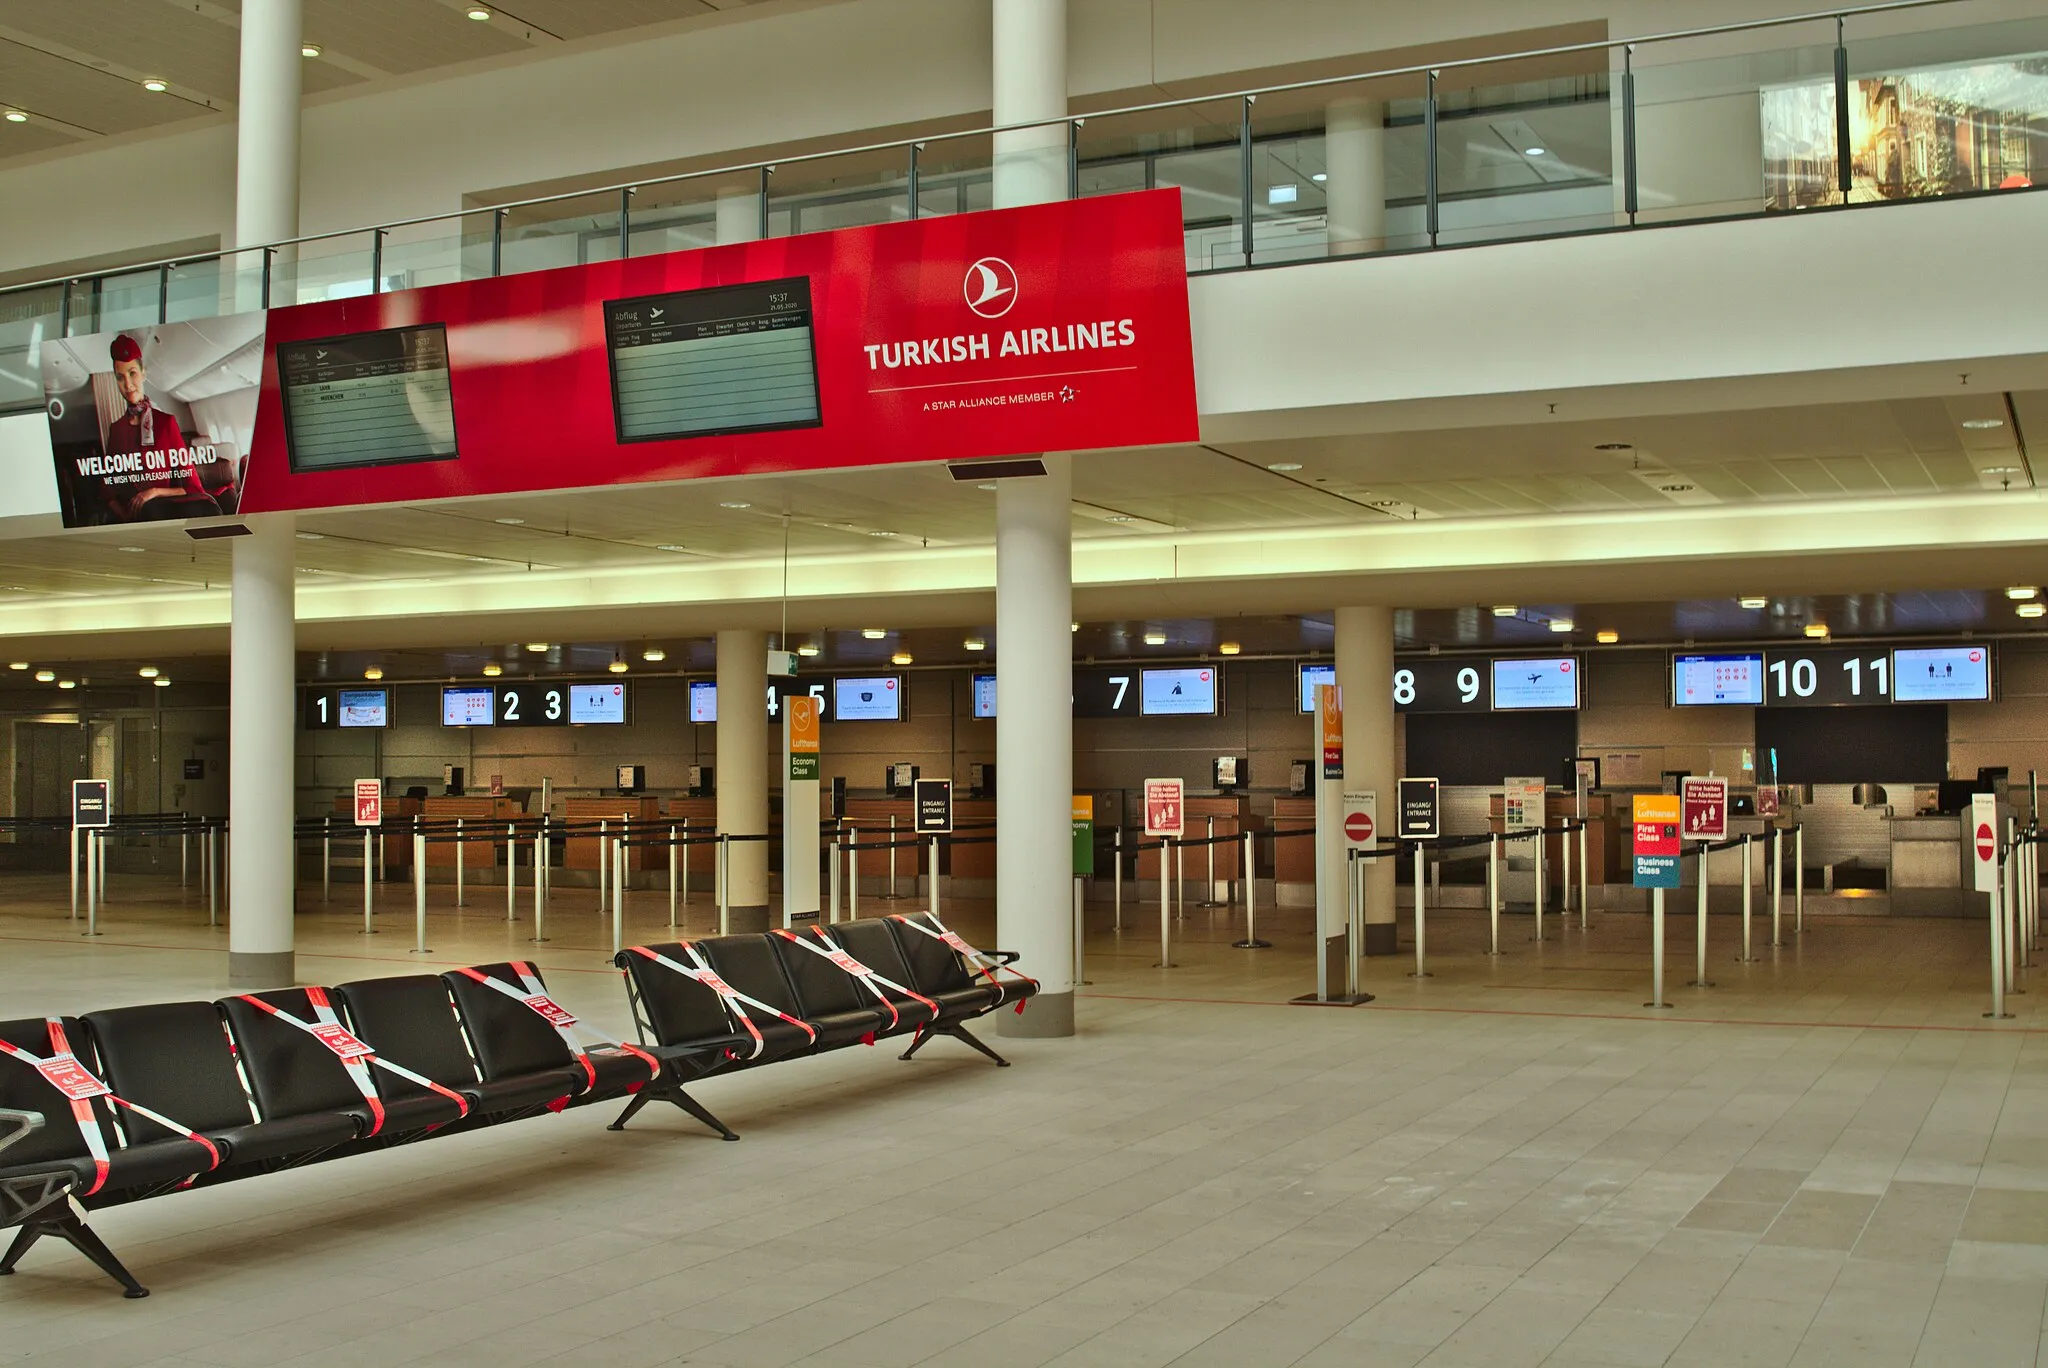 Photo showing: Departure hall of terminal 1 of Bremen Airport, deserted and with unmanned check-in counters during the Covid-19 crisis. Only one passenger aircraft per day departs here. On the bench in the foreground, every second seat is fenced off to comply with the applicable social distancing rules.